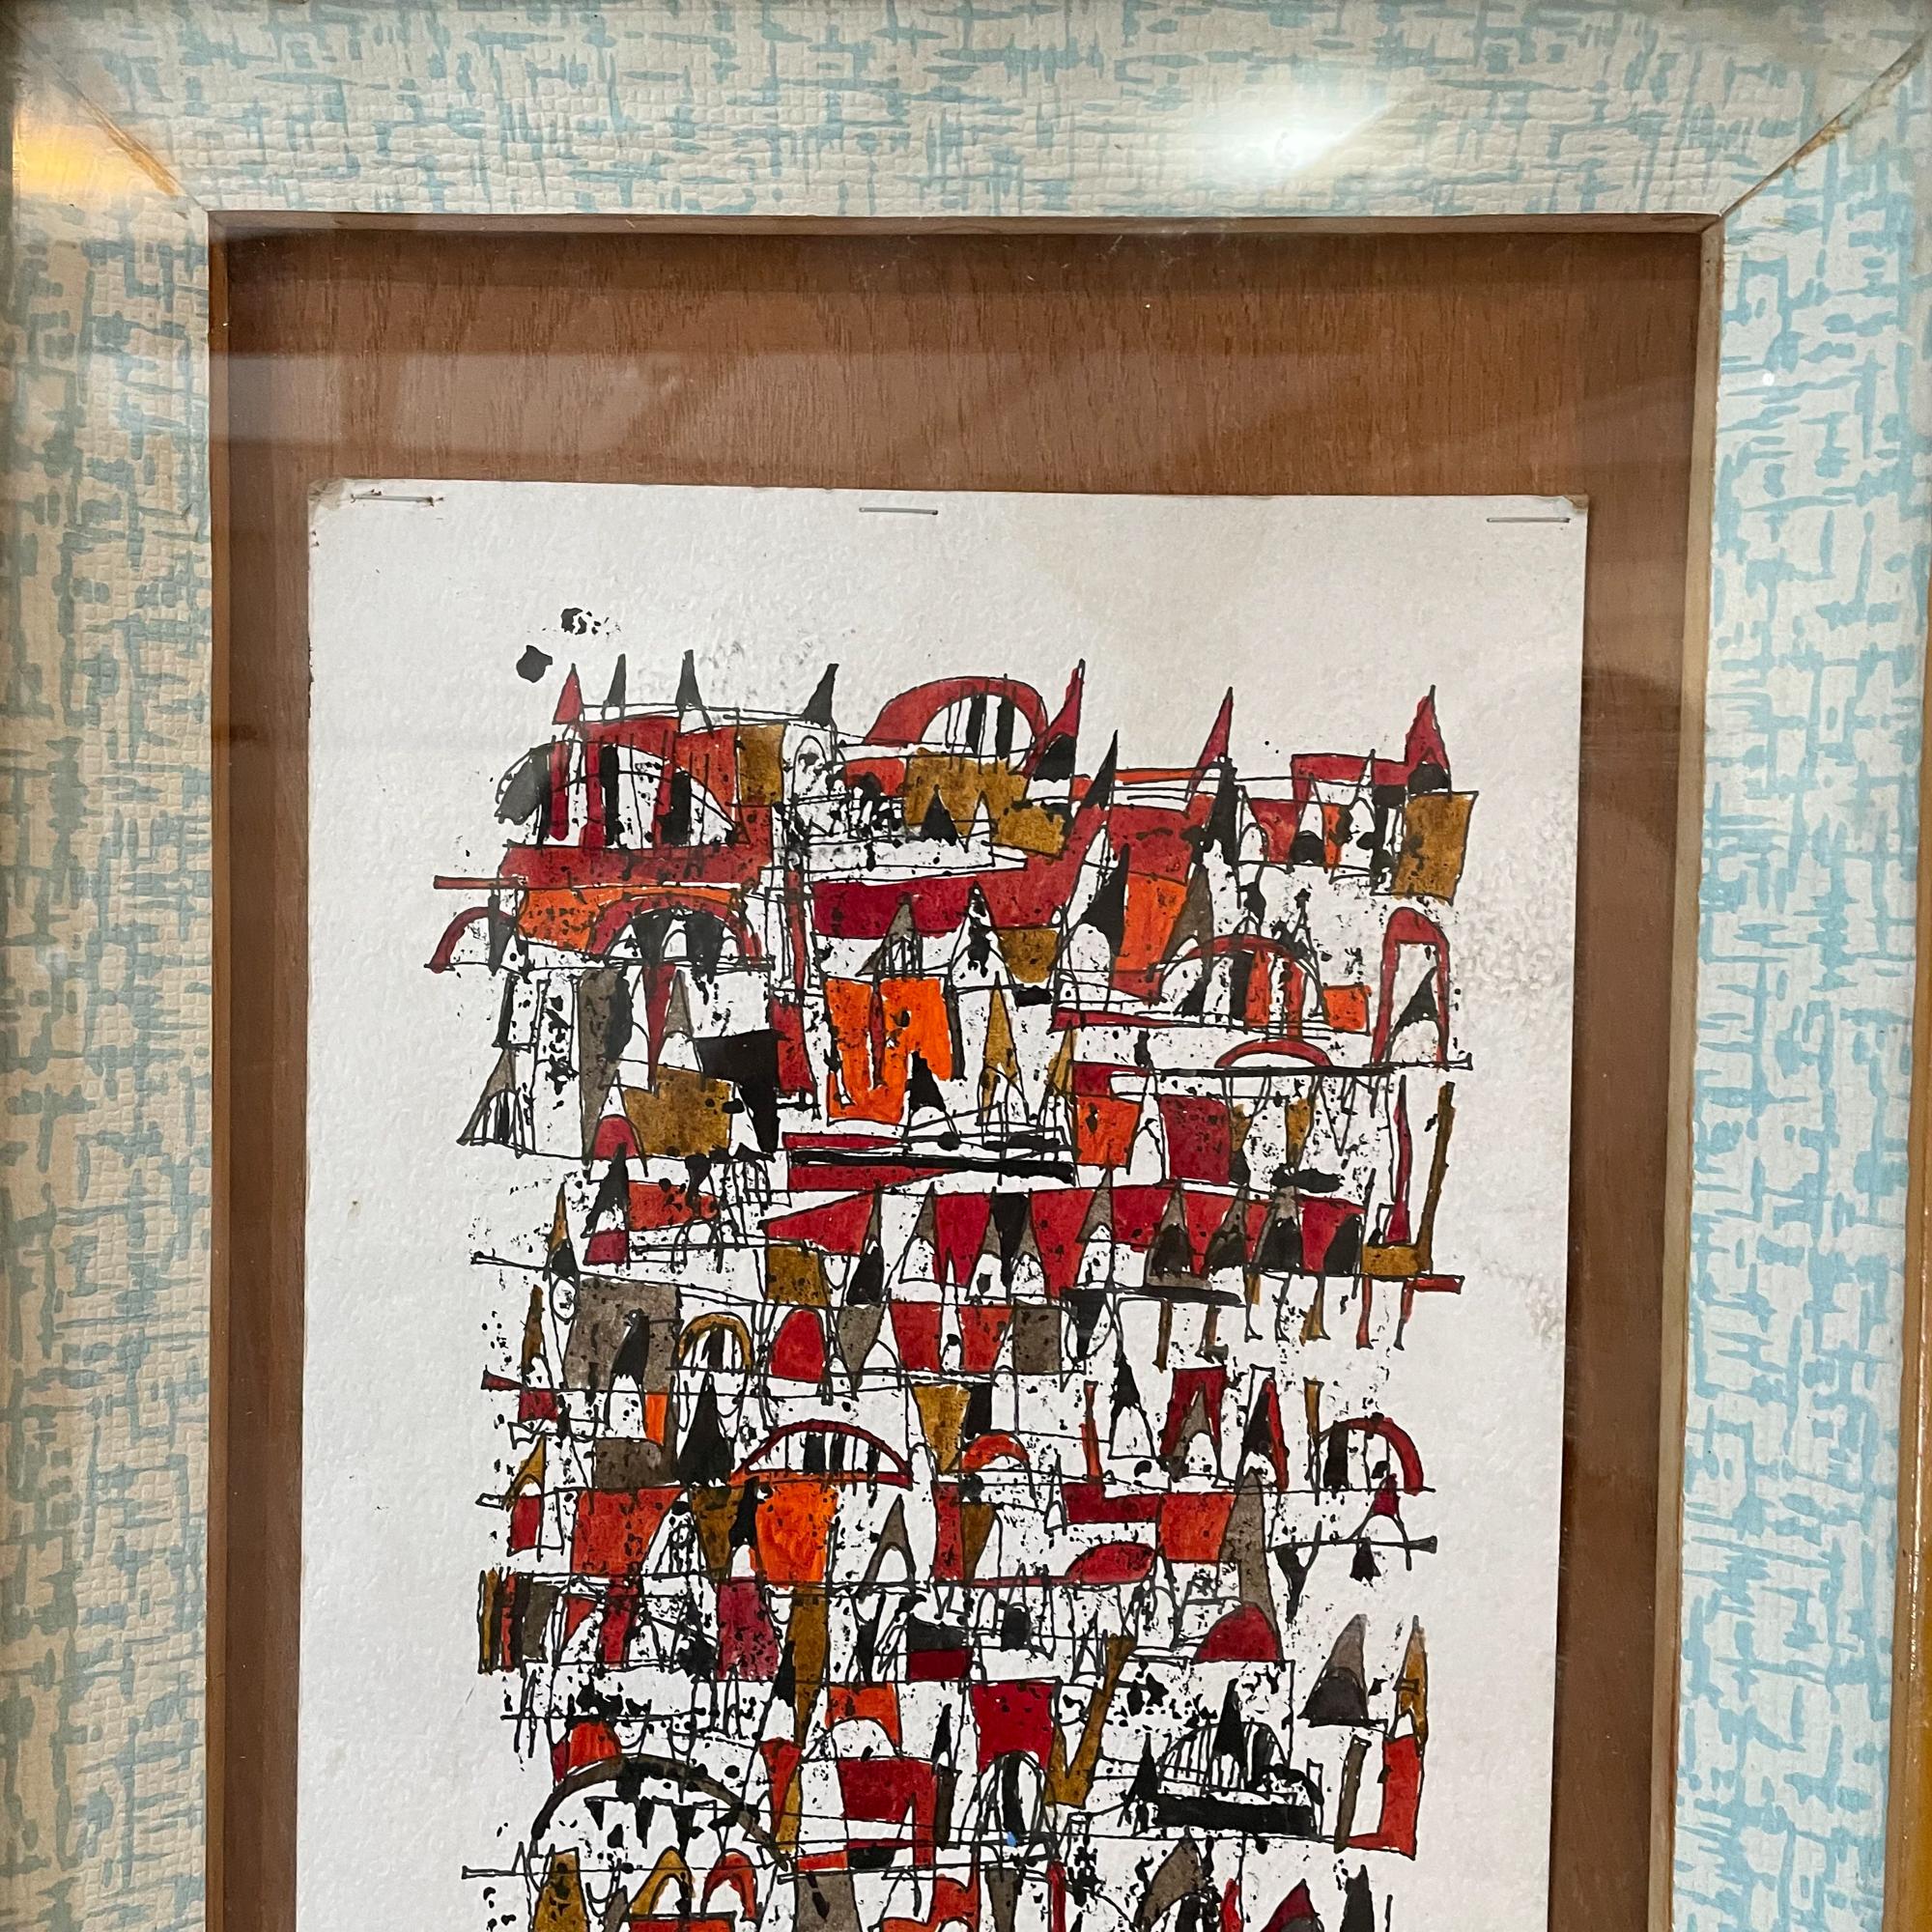 Mexican Mid-Century Modern art signed. Unable to read signature. 
Red and black beautiful ink on paper. 
Framed. 
Signed pencil lower right corner.
Uniquely designed brass hook for hanging art.
30.5 Tall x 12.5 width x 1.63 depth
Original unrestored